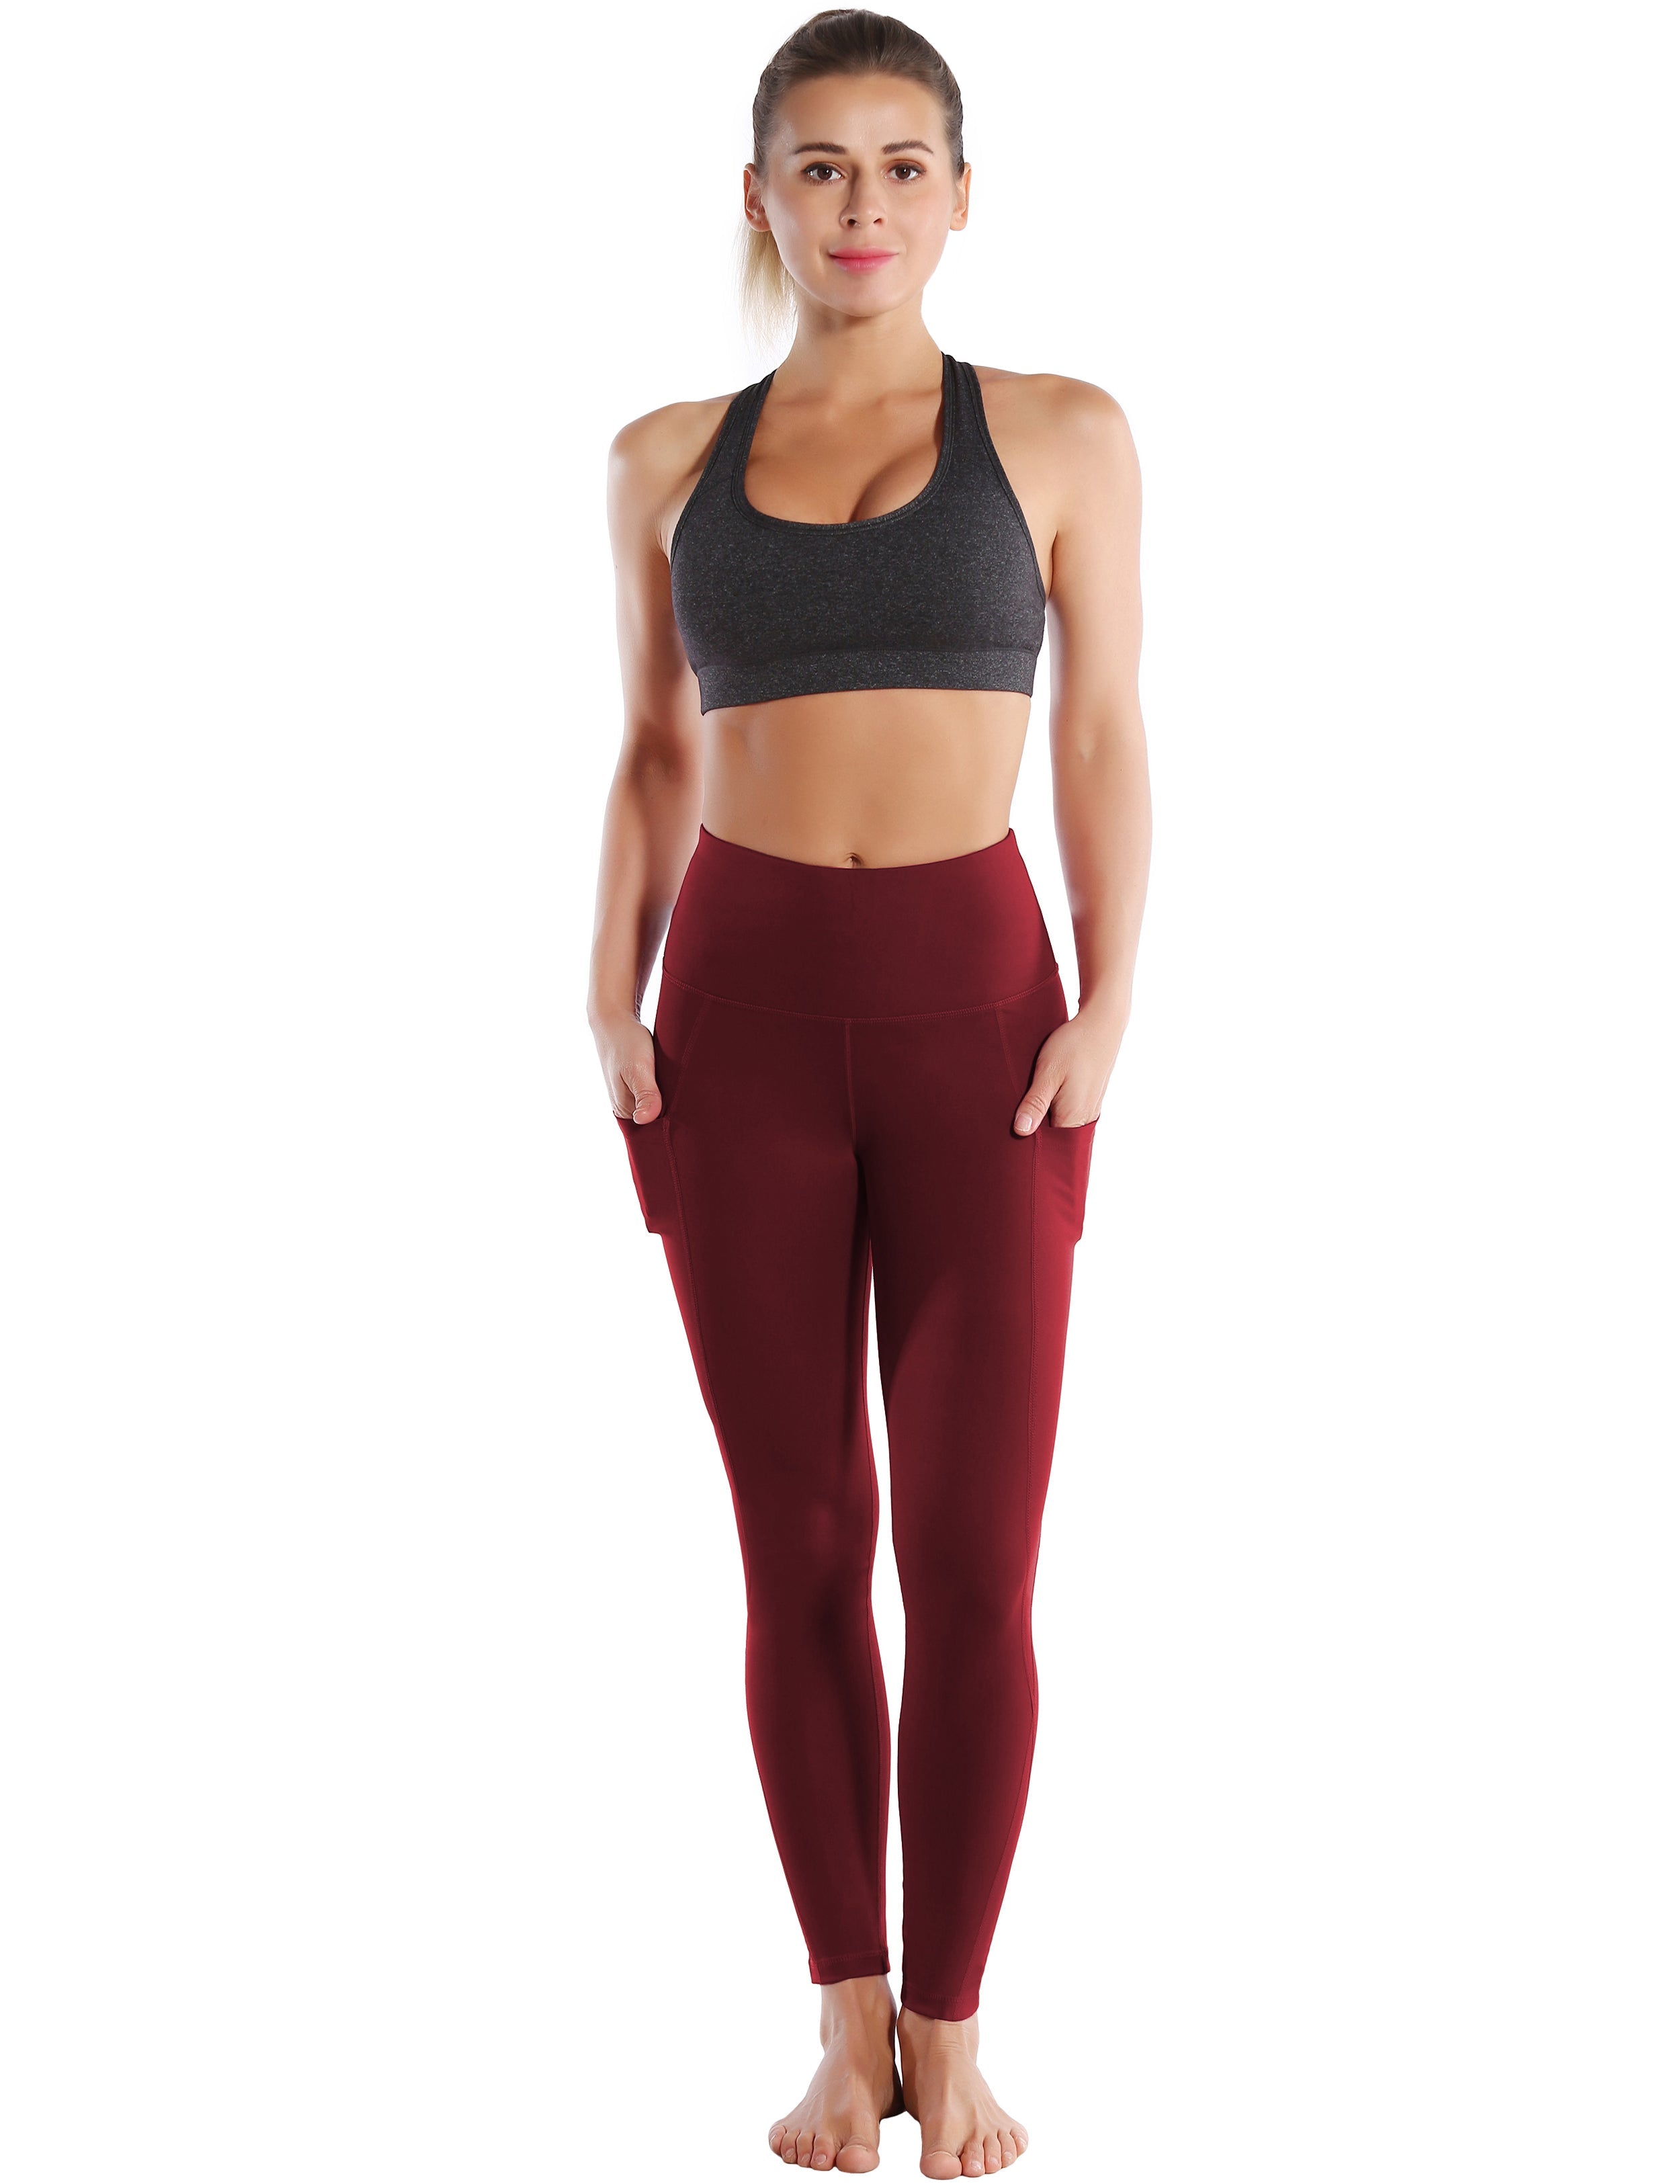 High Waist Side Pockets Pilates Pants cherryred 75% Nylon, 25% Spandex Fabric doesn't attract lint easily 4-way stretch No see-through Moisture-wicking Tummy control Inner pocket